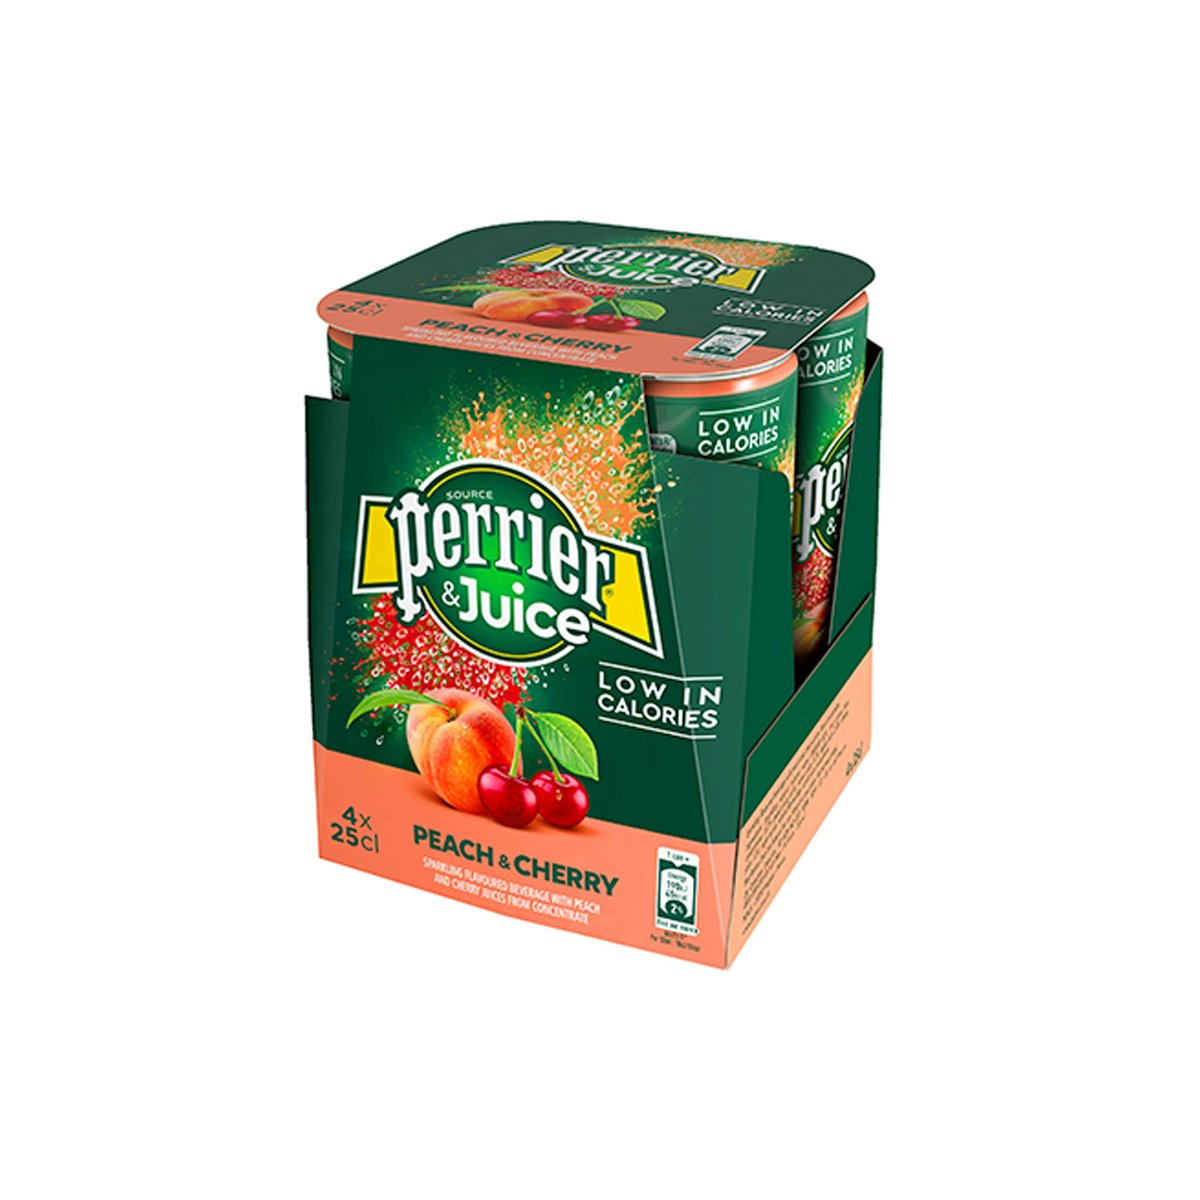 Perrier & Juice Peach And Cherry 4 x 250 ml